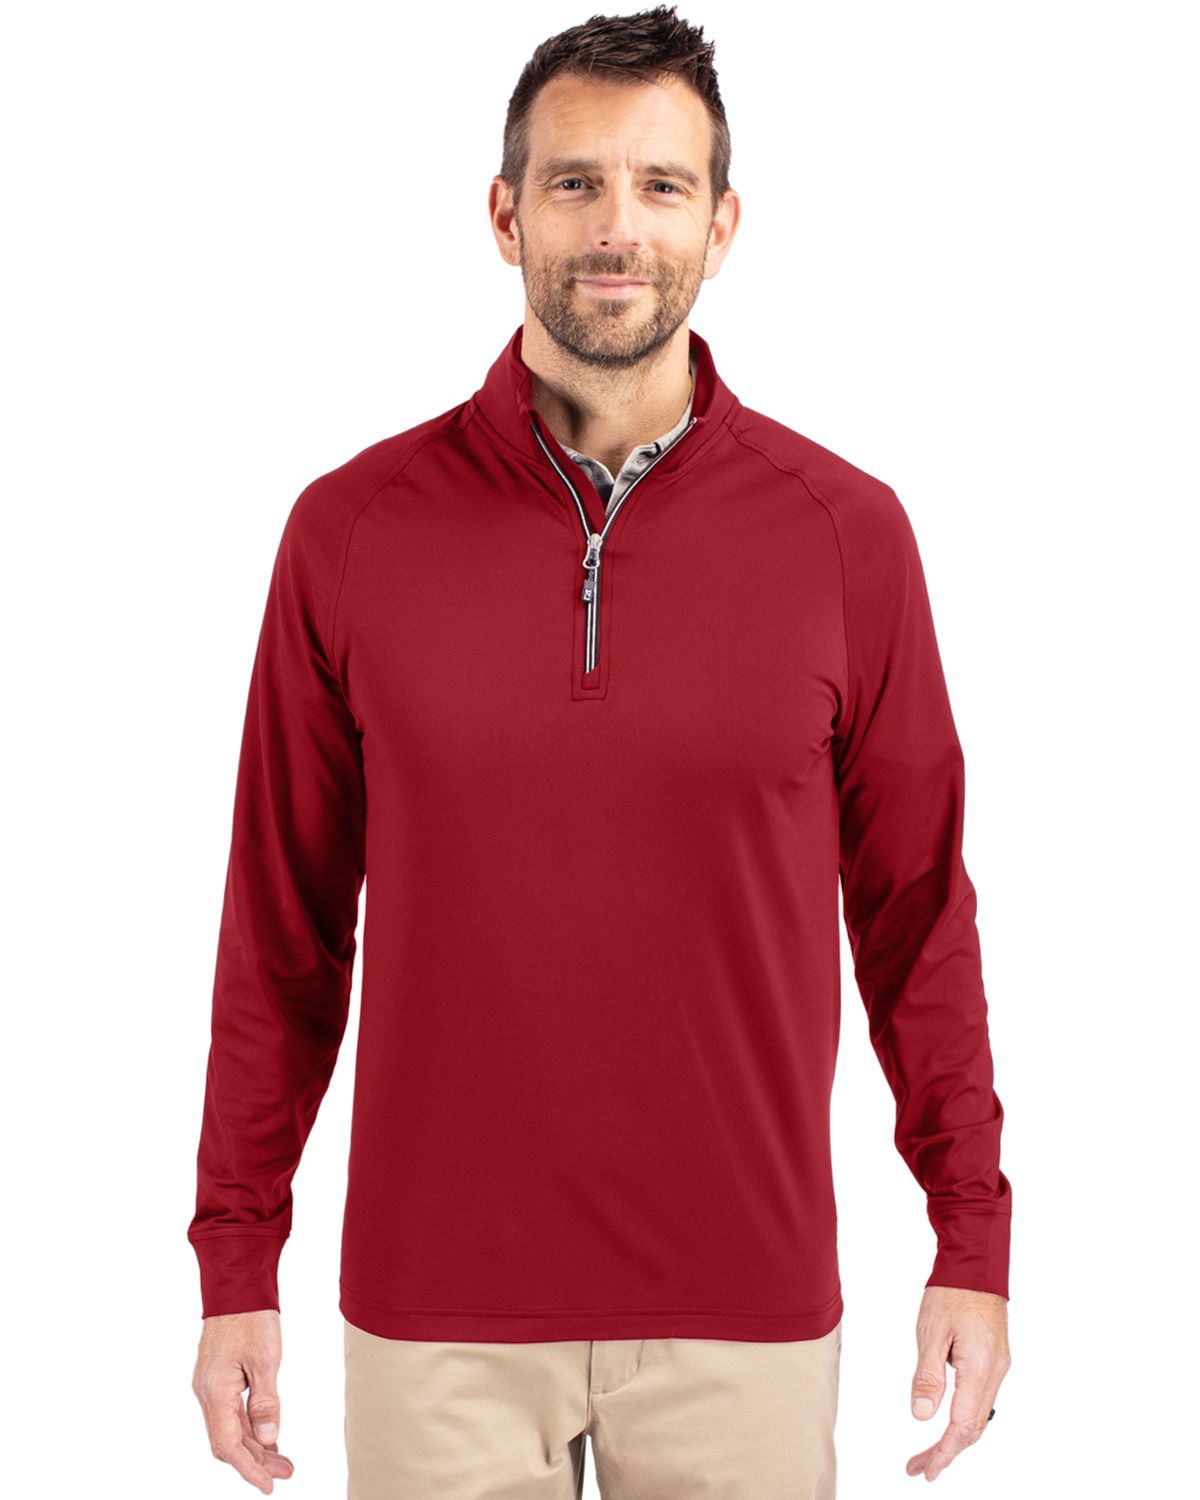 Big & Tall Adapt Eco Knit Stretch Recycled Quarter Zip Pullover Jacket - Cardinal red